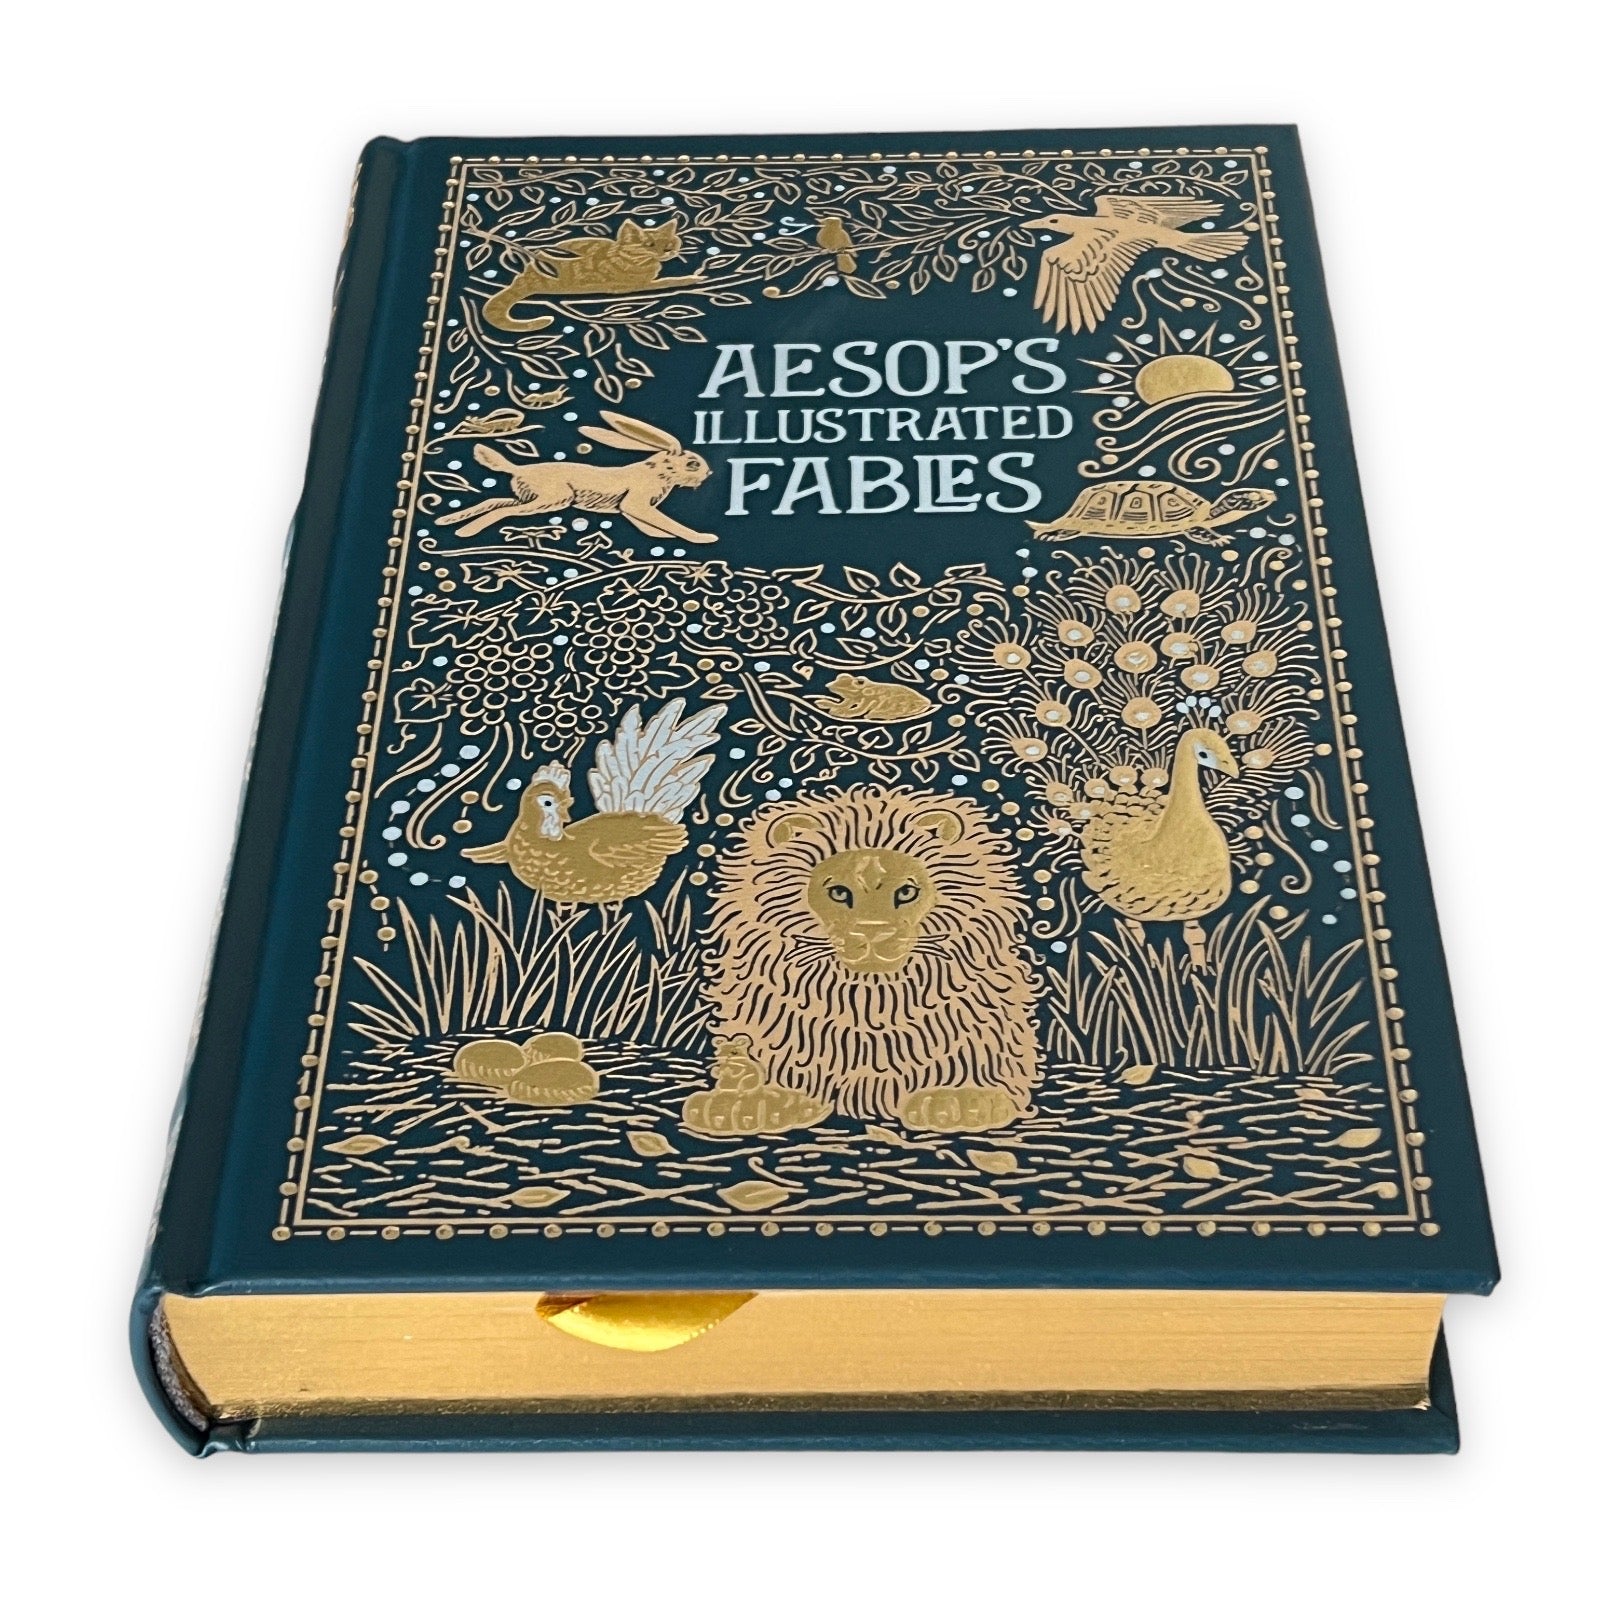 AESOP'S ILLUSTRATED FABLES Fairy Tales, Fantasy Story - Collectible Deluxe  Edition - Leather Bound Hardcover - Best Seller - Classic Book